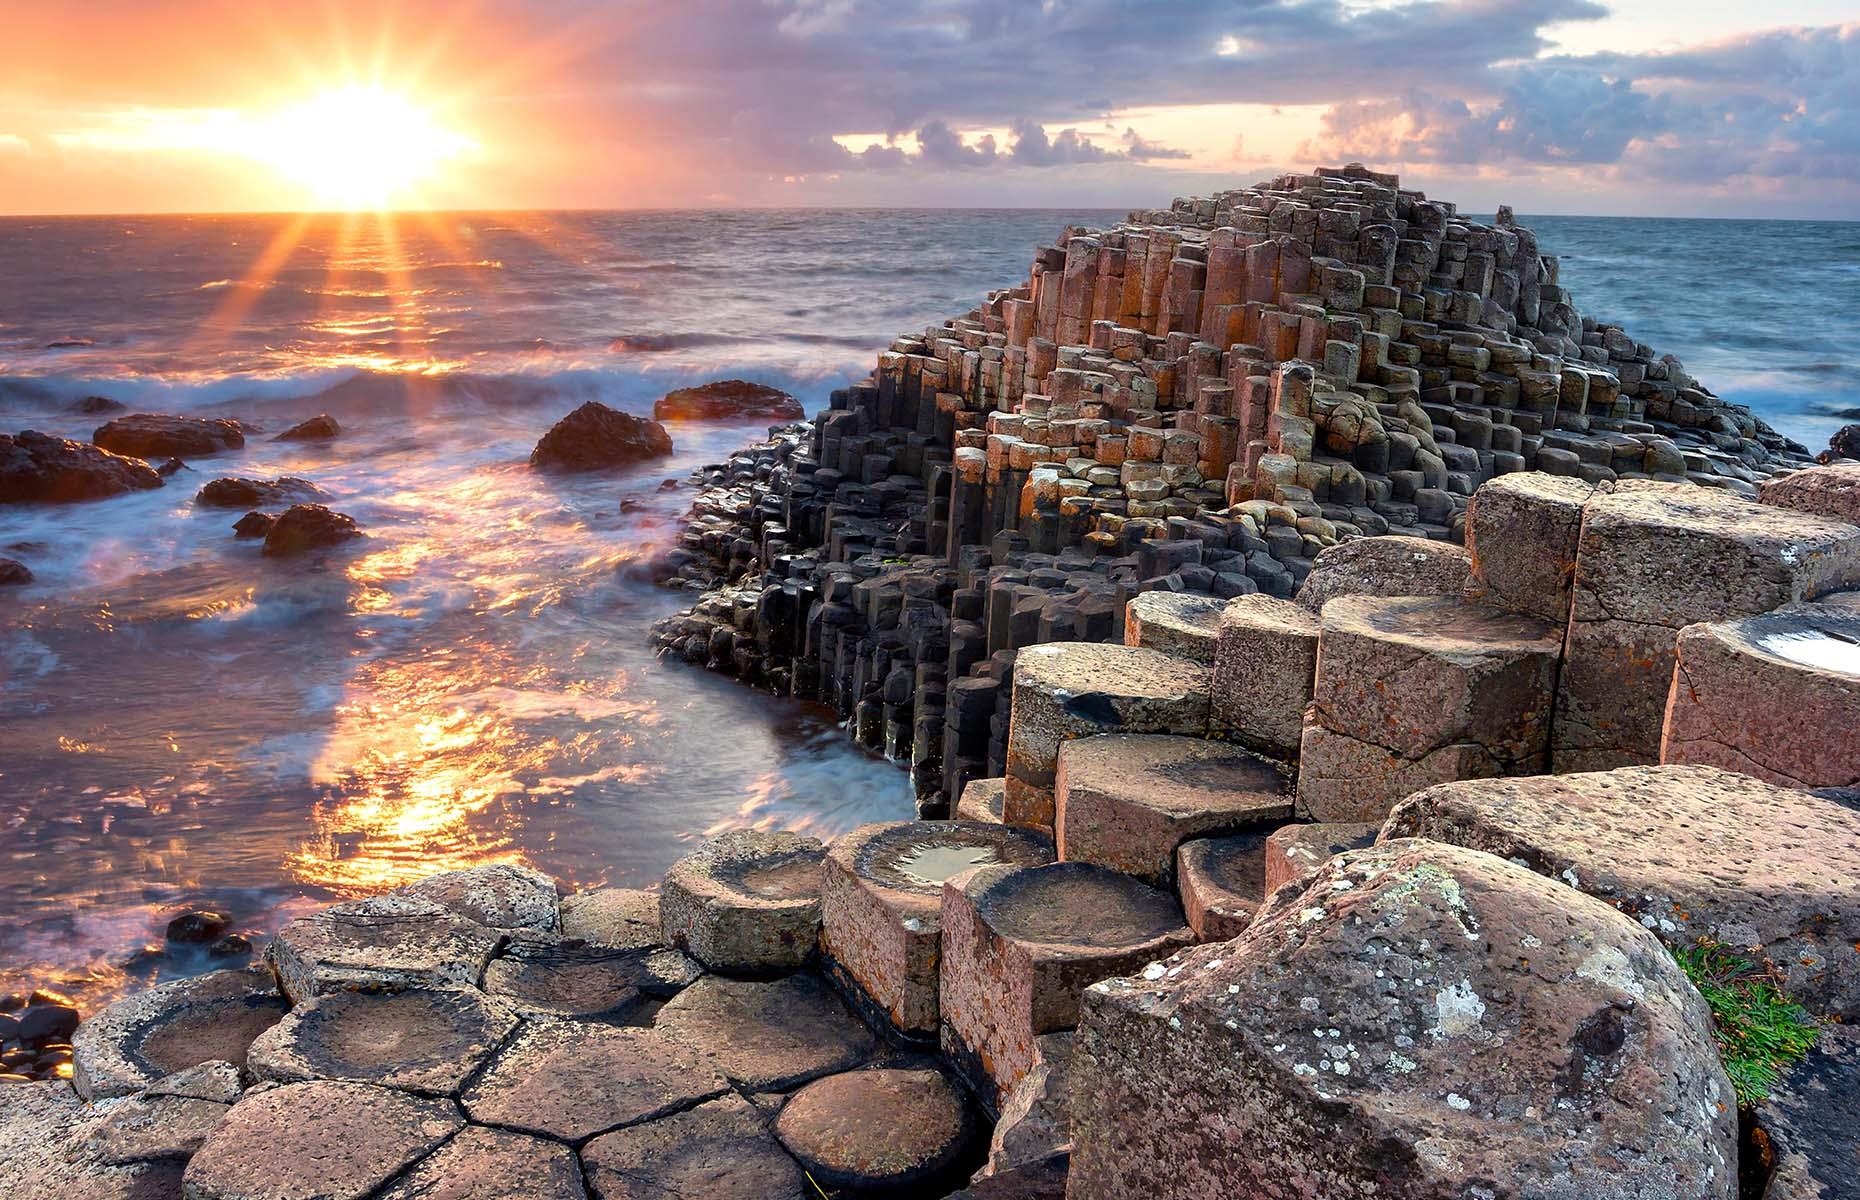 It's hardly surprising that this surreal rock formation on the coast of Antrim in Northern Ireland is steeped in magical legends. The curious, near-perfect hexagonal columns are a marvel of nature. According to folklore, the causeway was built by Irish giant Finn McCool so he could cross over to Scotland to confront his rival Benandonner. However, scientists would have it that the basalt 'steps' were caused by intense volcanic activity some 50 to 60 million years ago.